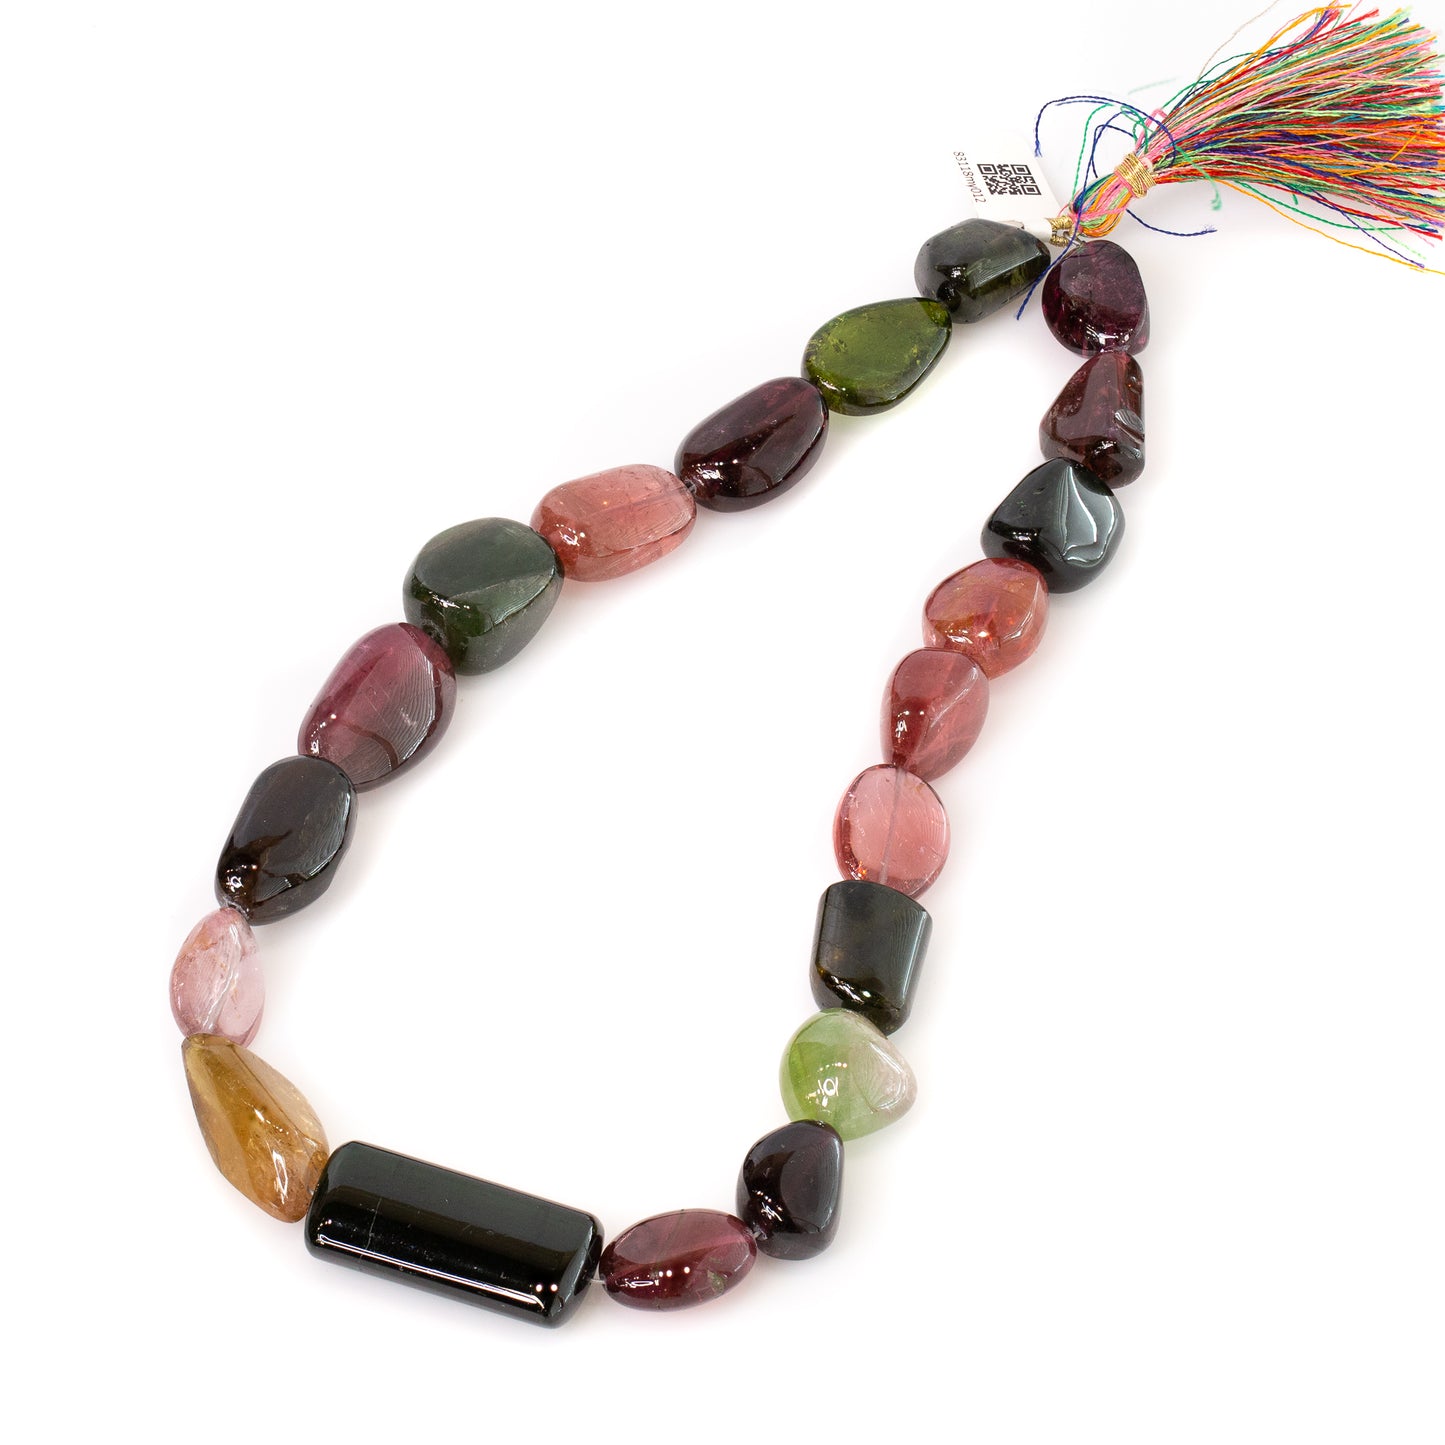 Multicolor Tourmaline 14x14-34mm Assorted Shape Long-Drill Smooth Tumbled Nugget Bead - 16.5" Strand